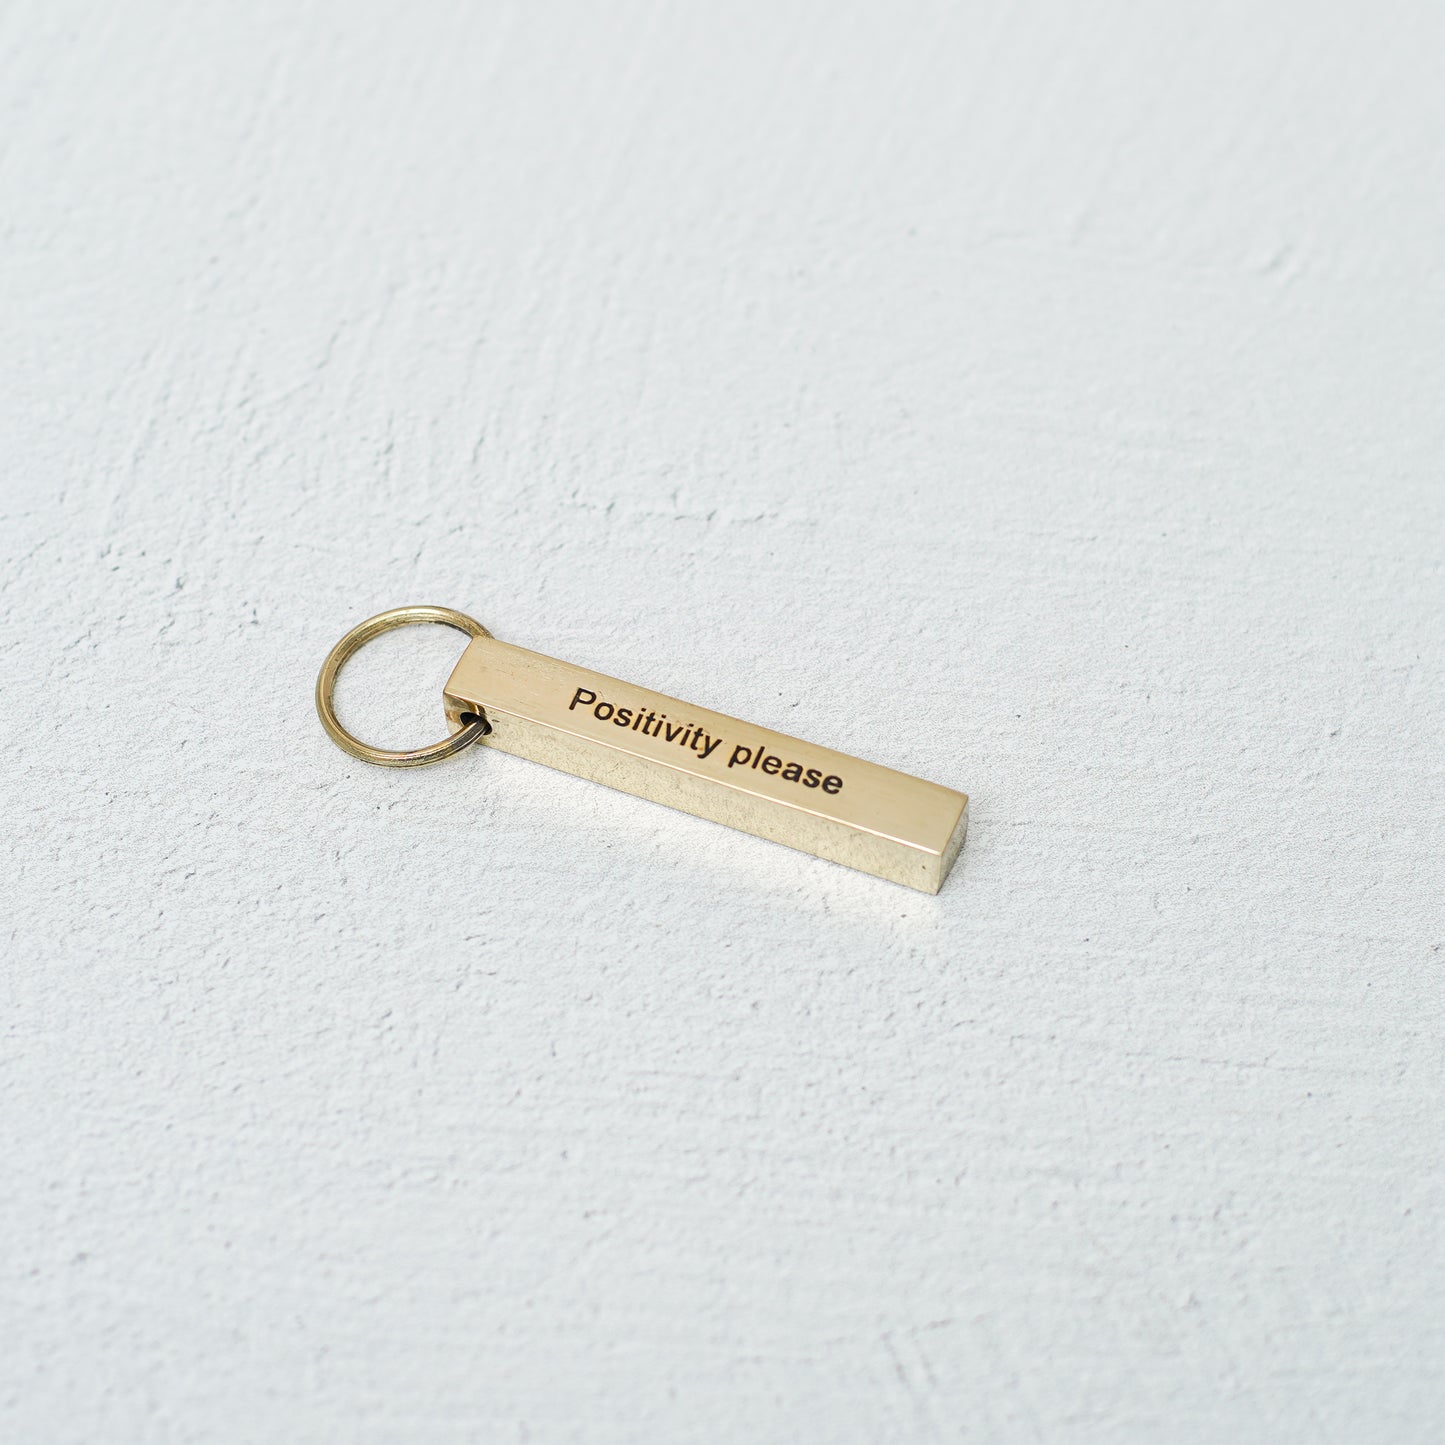 Metal Key Chain with Quote